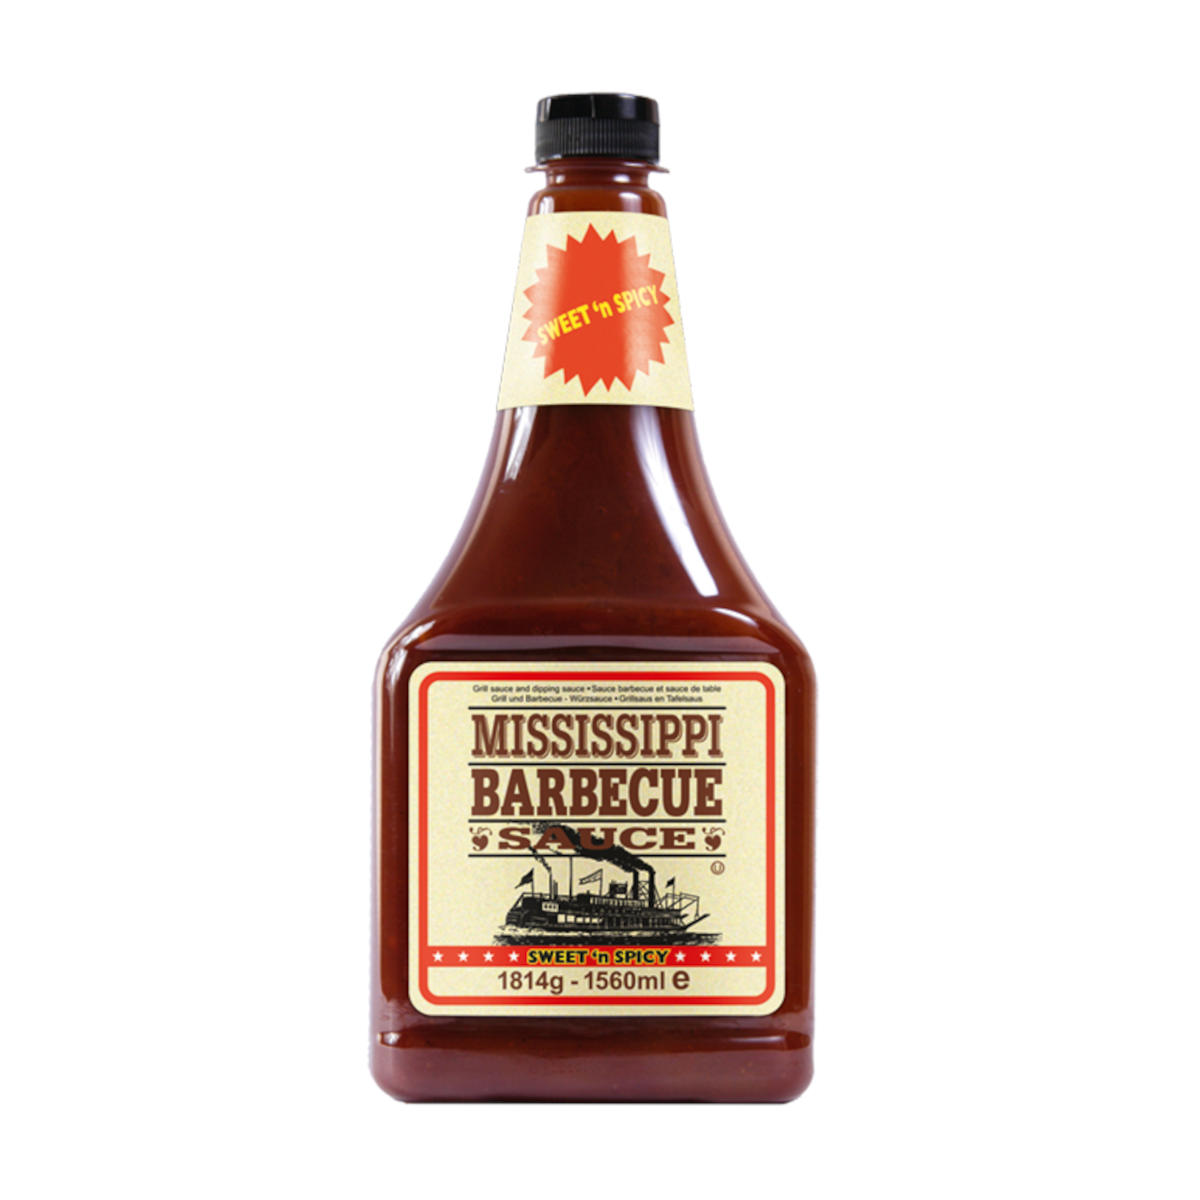 Mississippi BBQ Sauce Sweetn Spicy 1814g